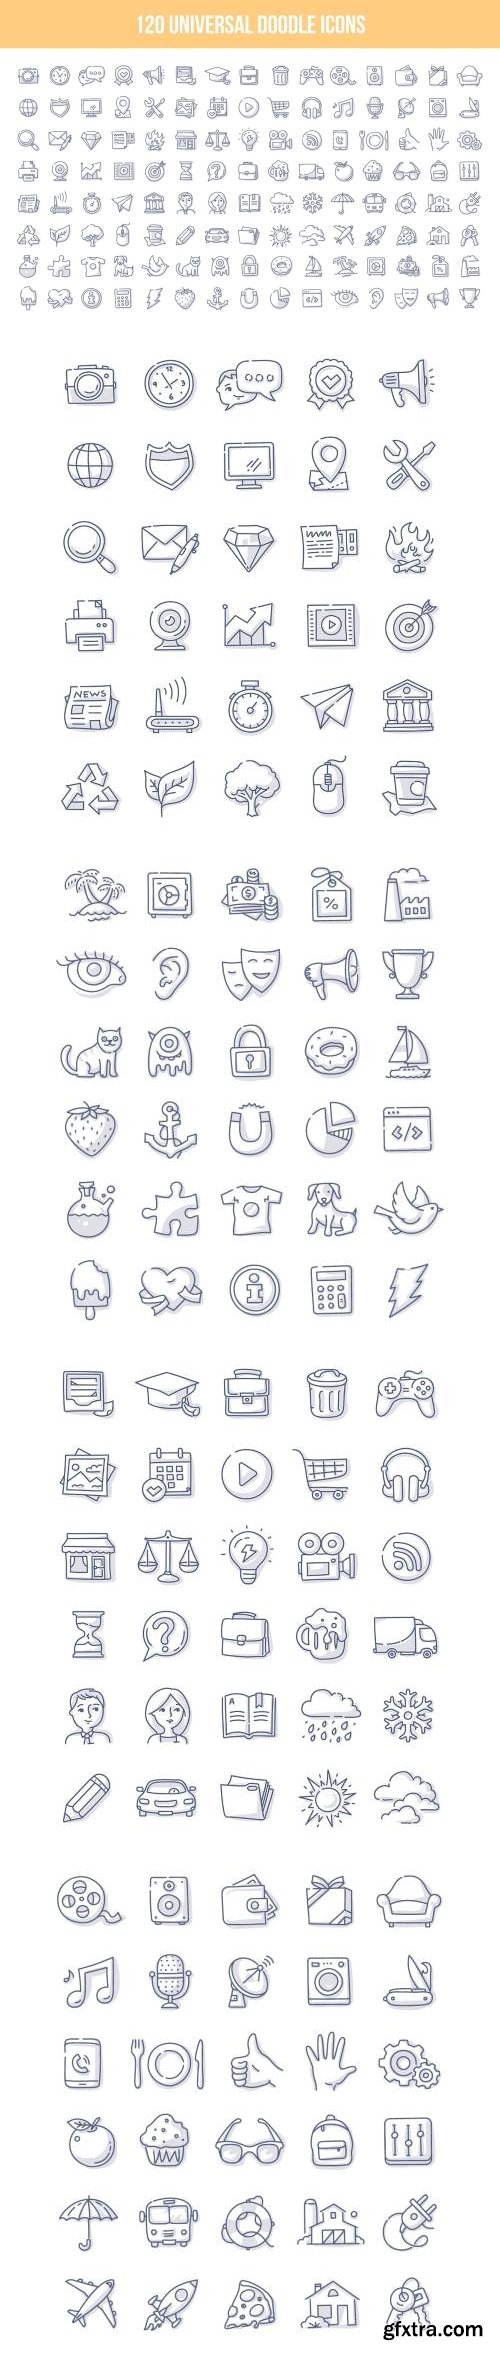 120 Universal Doodle Icons